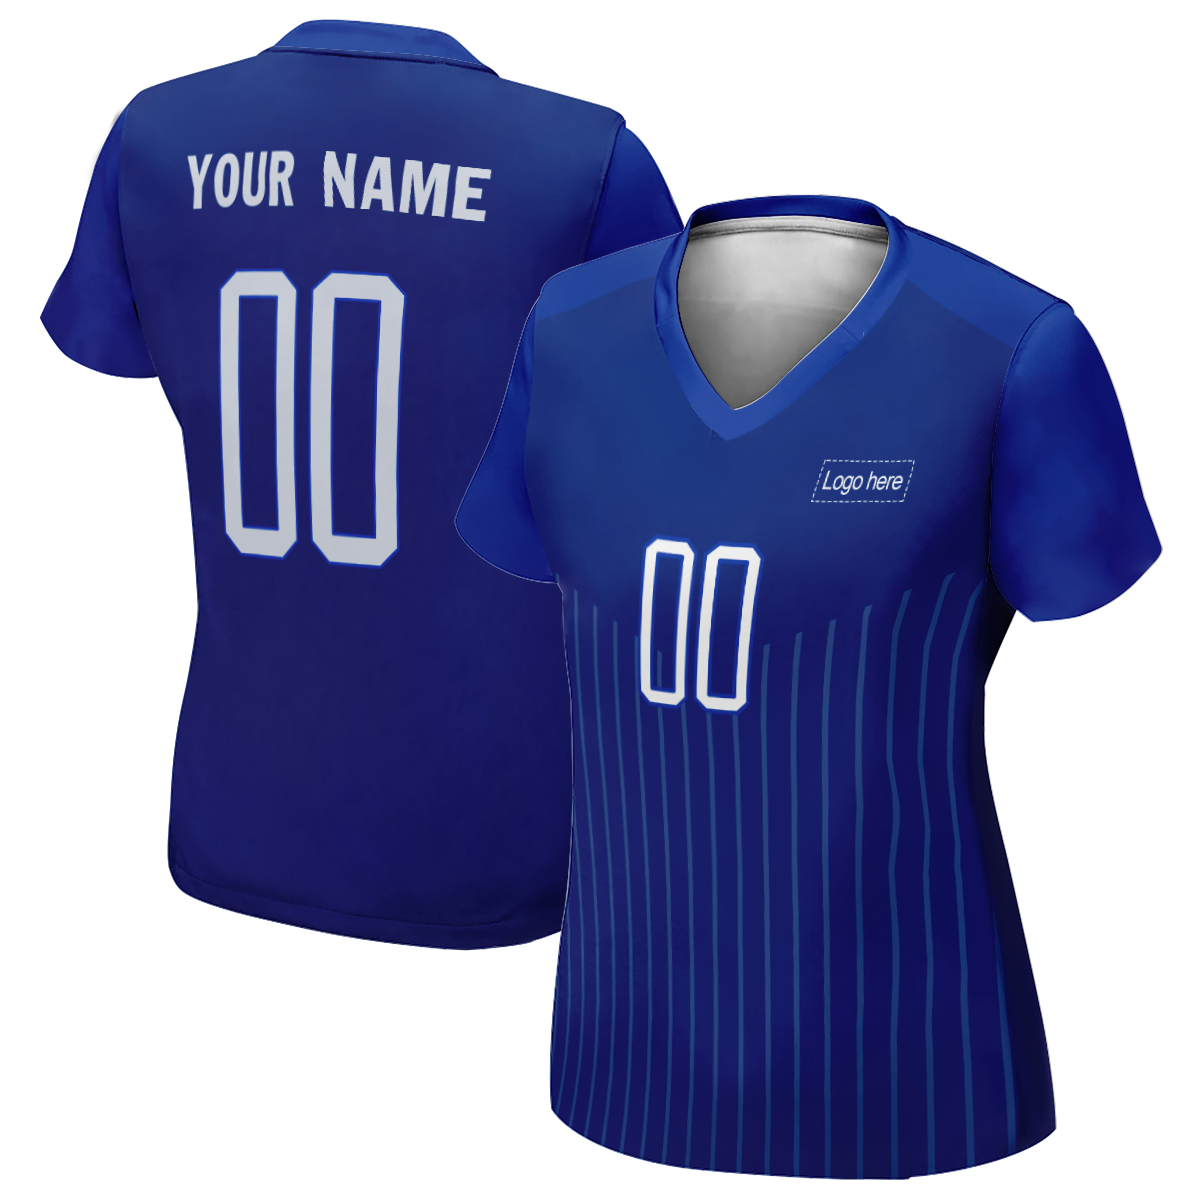 Women's Vintage Italy World Cup Custom Soccer Jersey With Logo